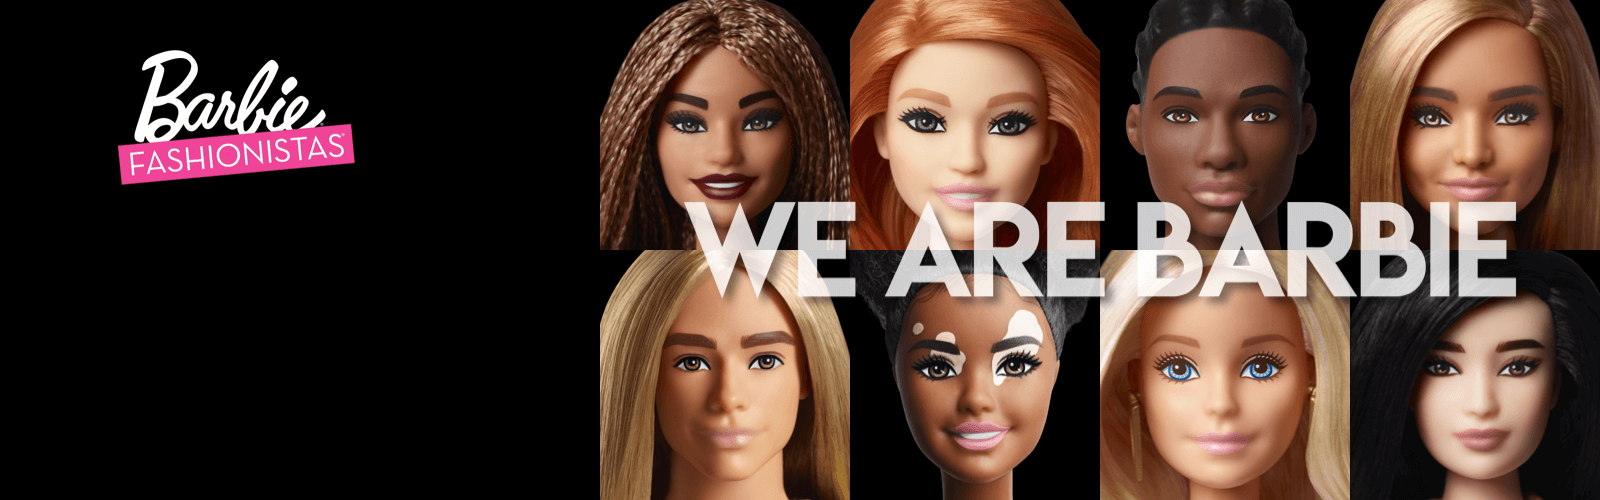 Barbie's Path to Inclusion - The DREDF Blog